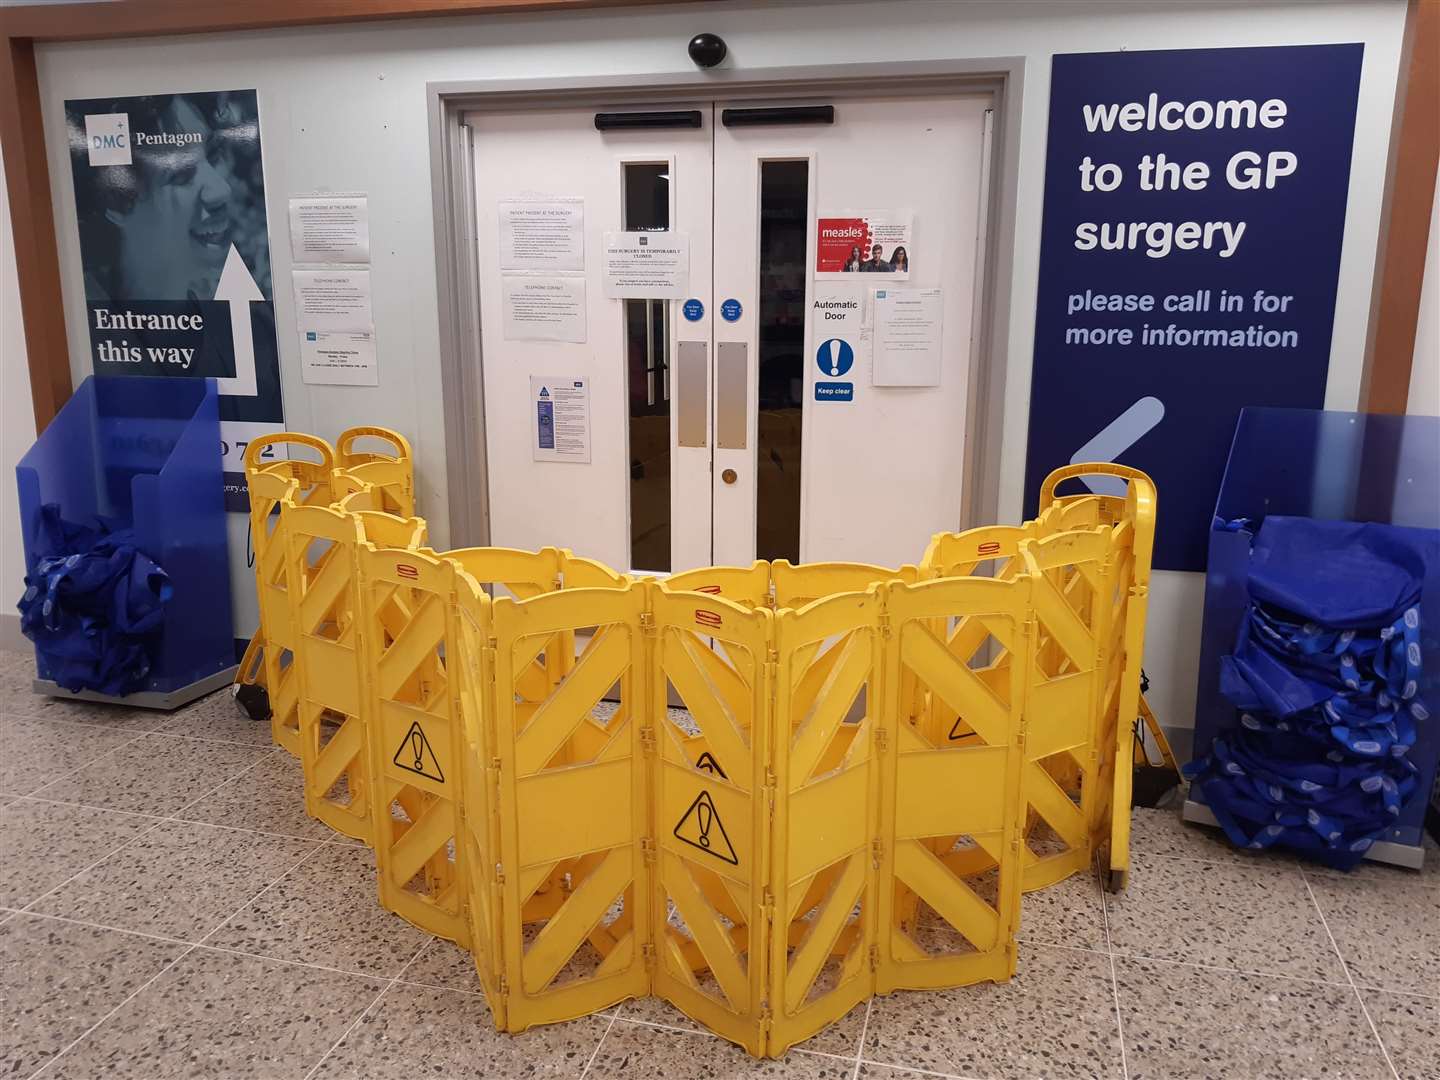 The blocked off entrance to DMC healthcare inside Boots at the Pentagon shopping centre, Chatham. A patient arrived at the surgery this morning displaying signs of coronavirus